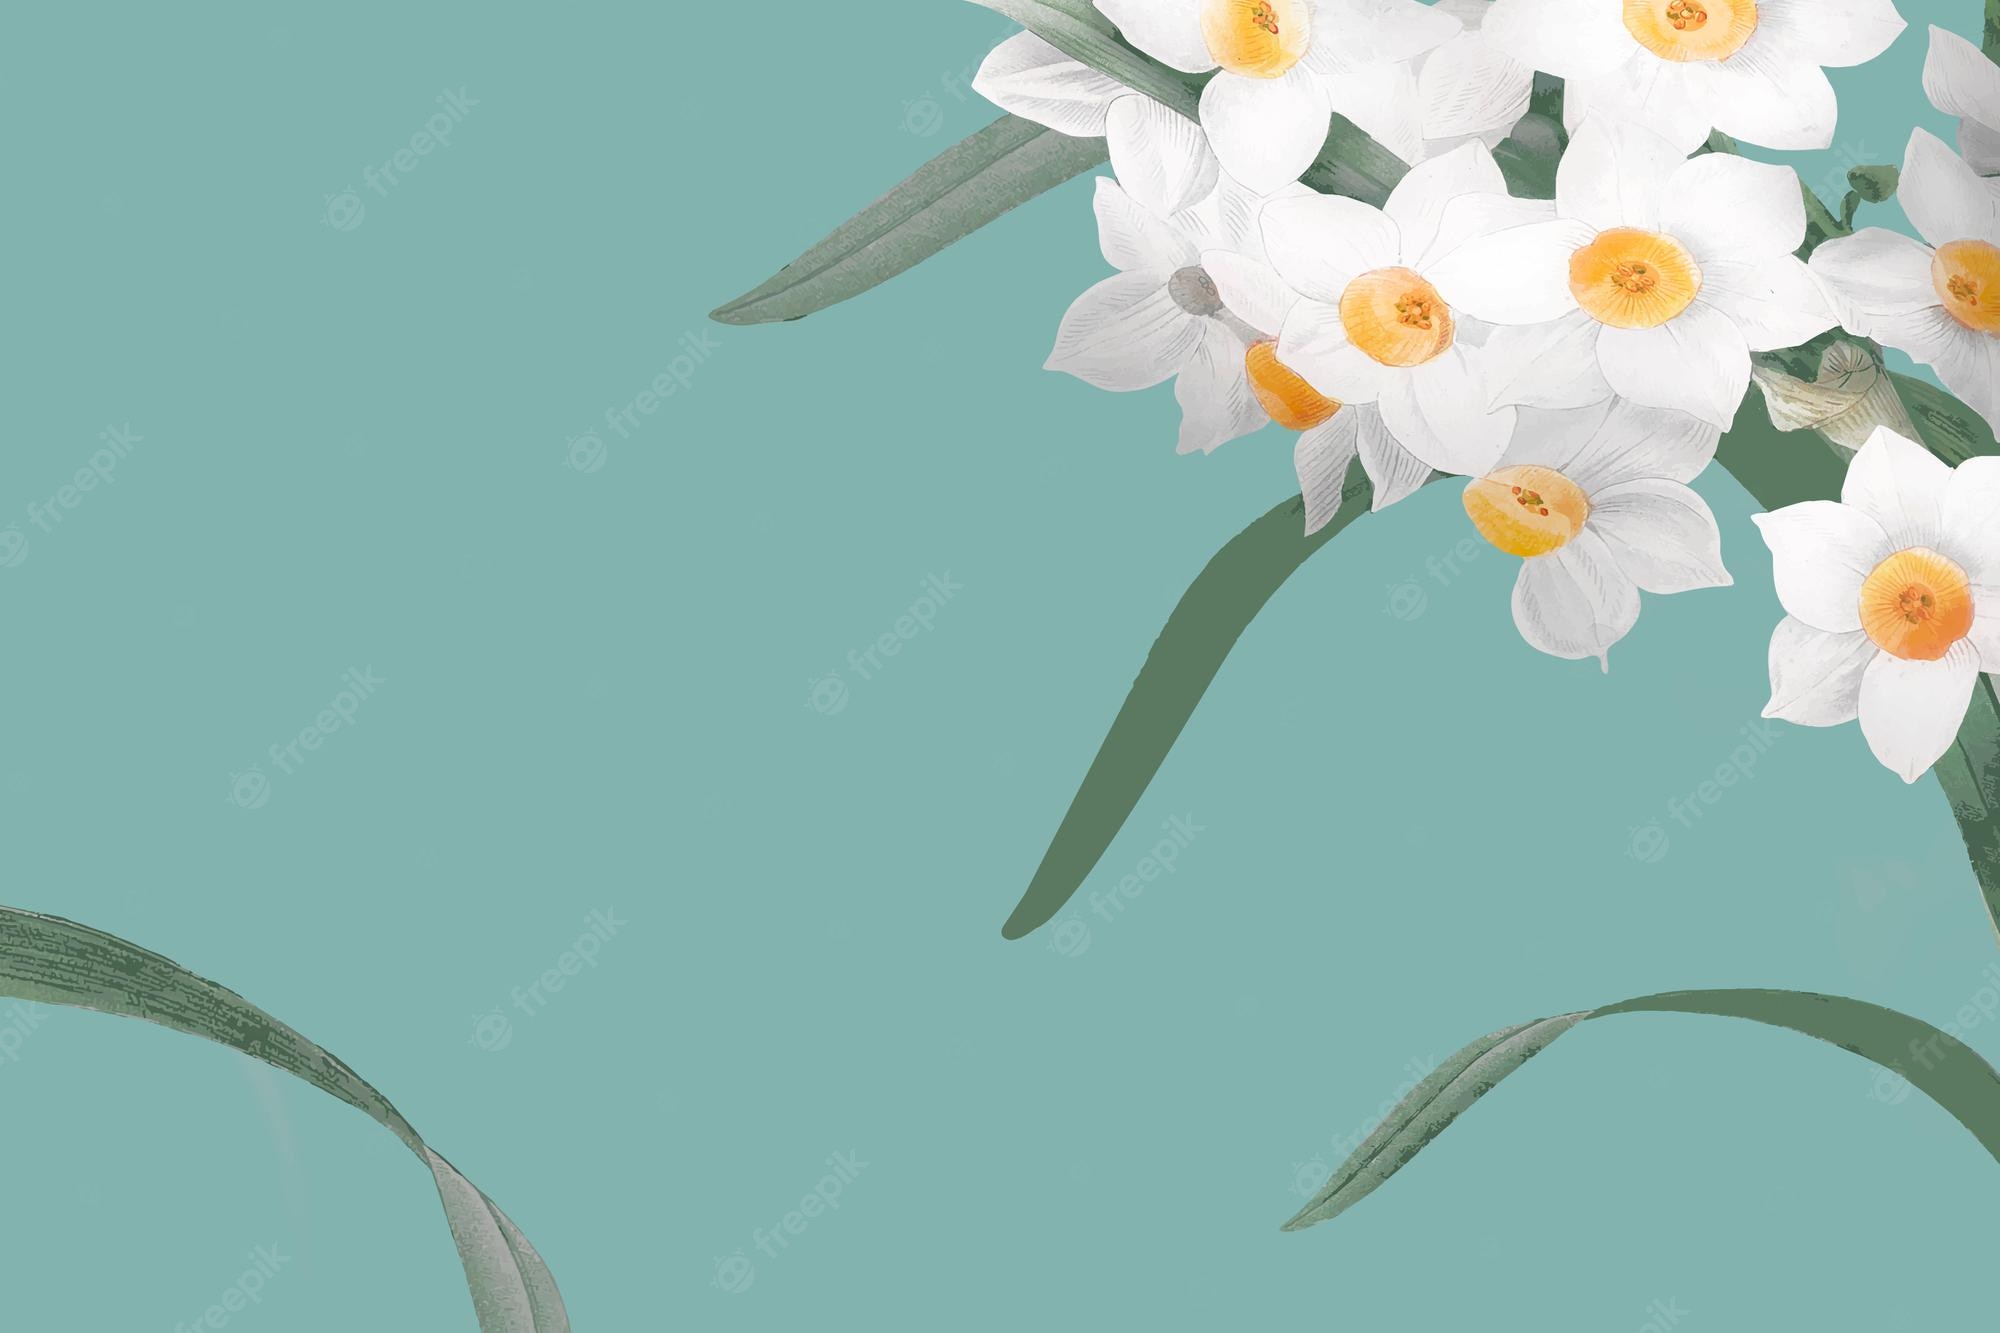 Daffodils Backgrounds